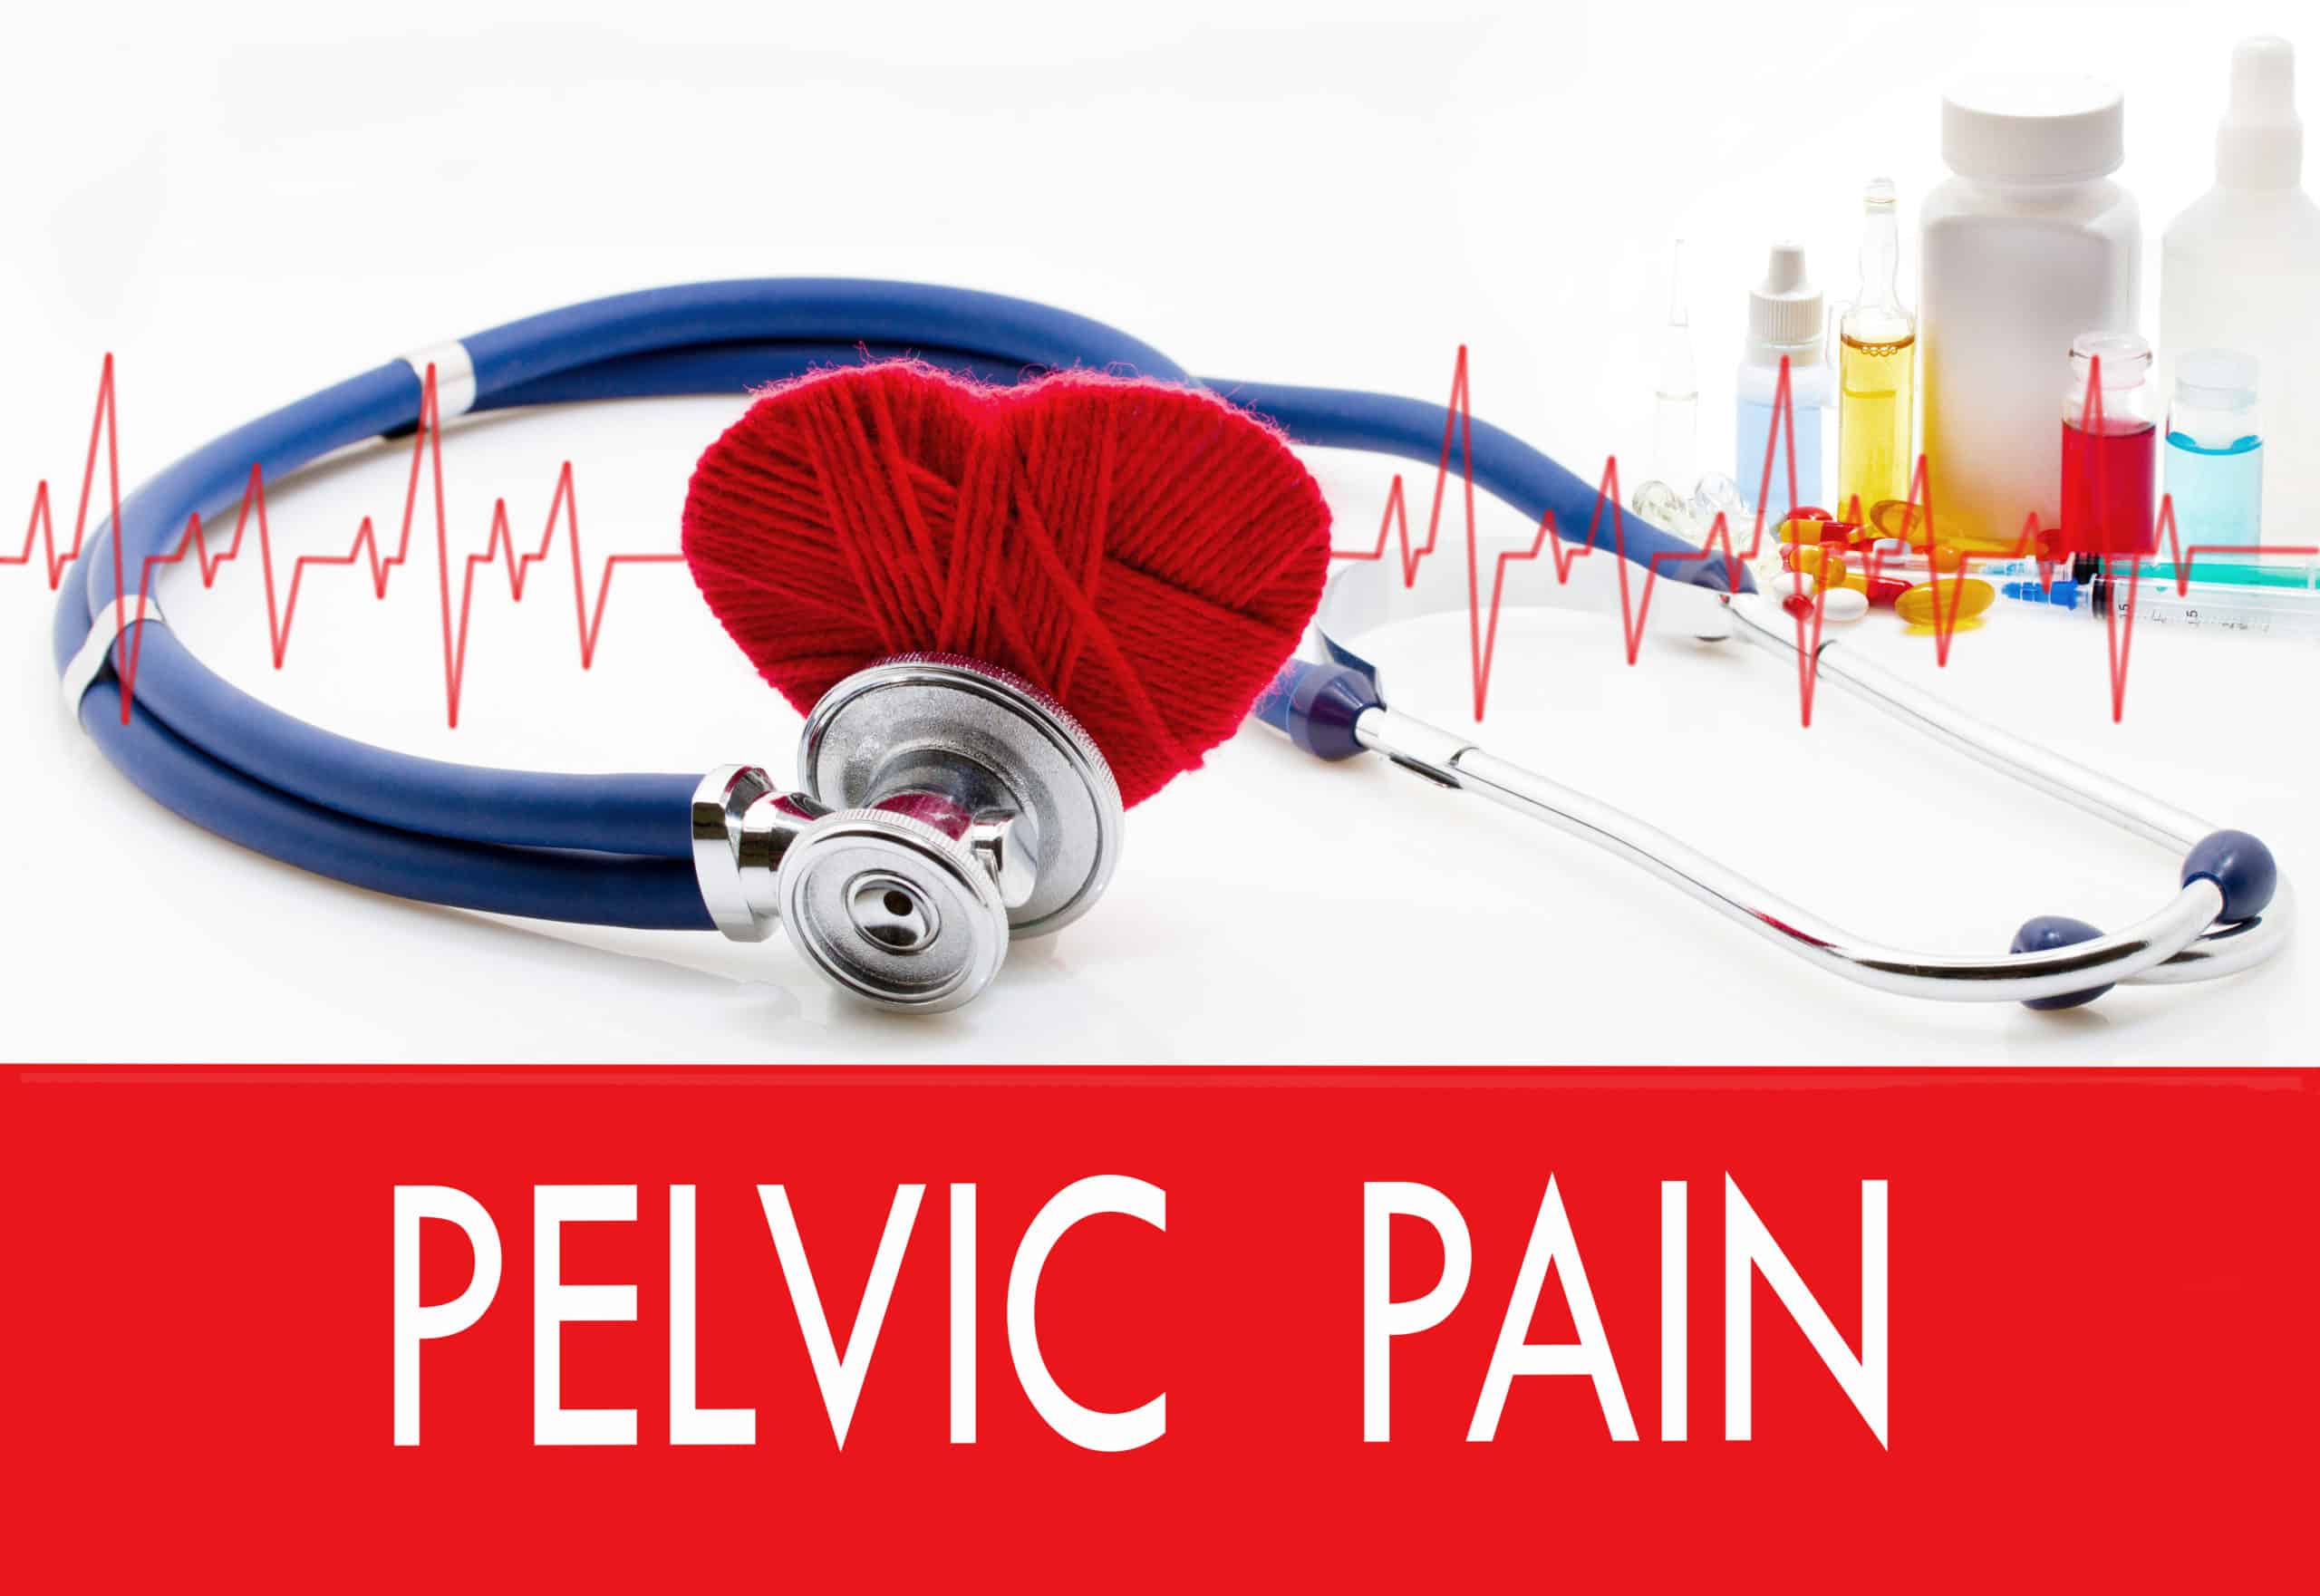 What is Pelvic Pain?